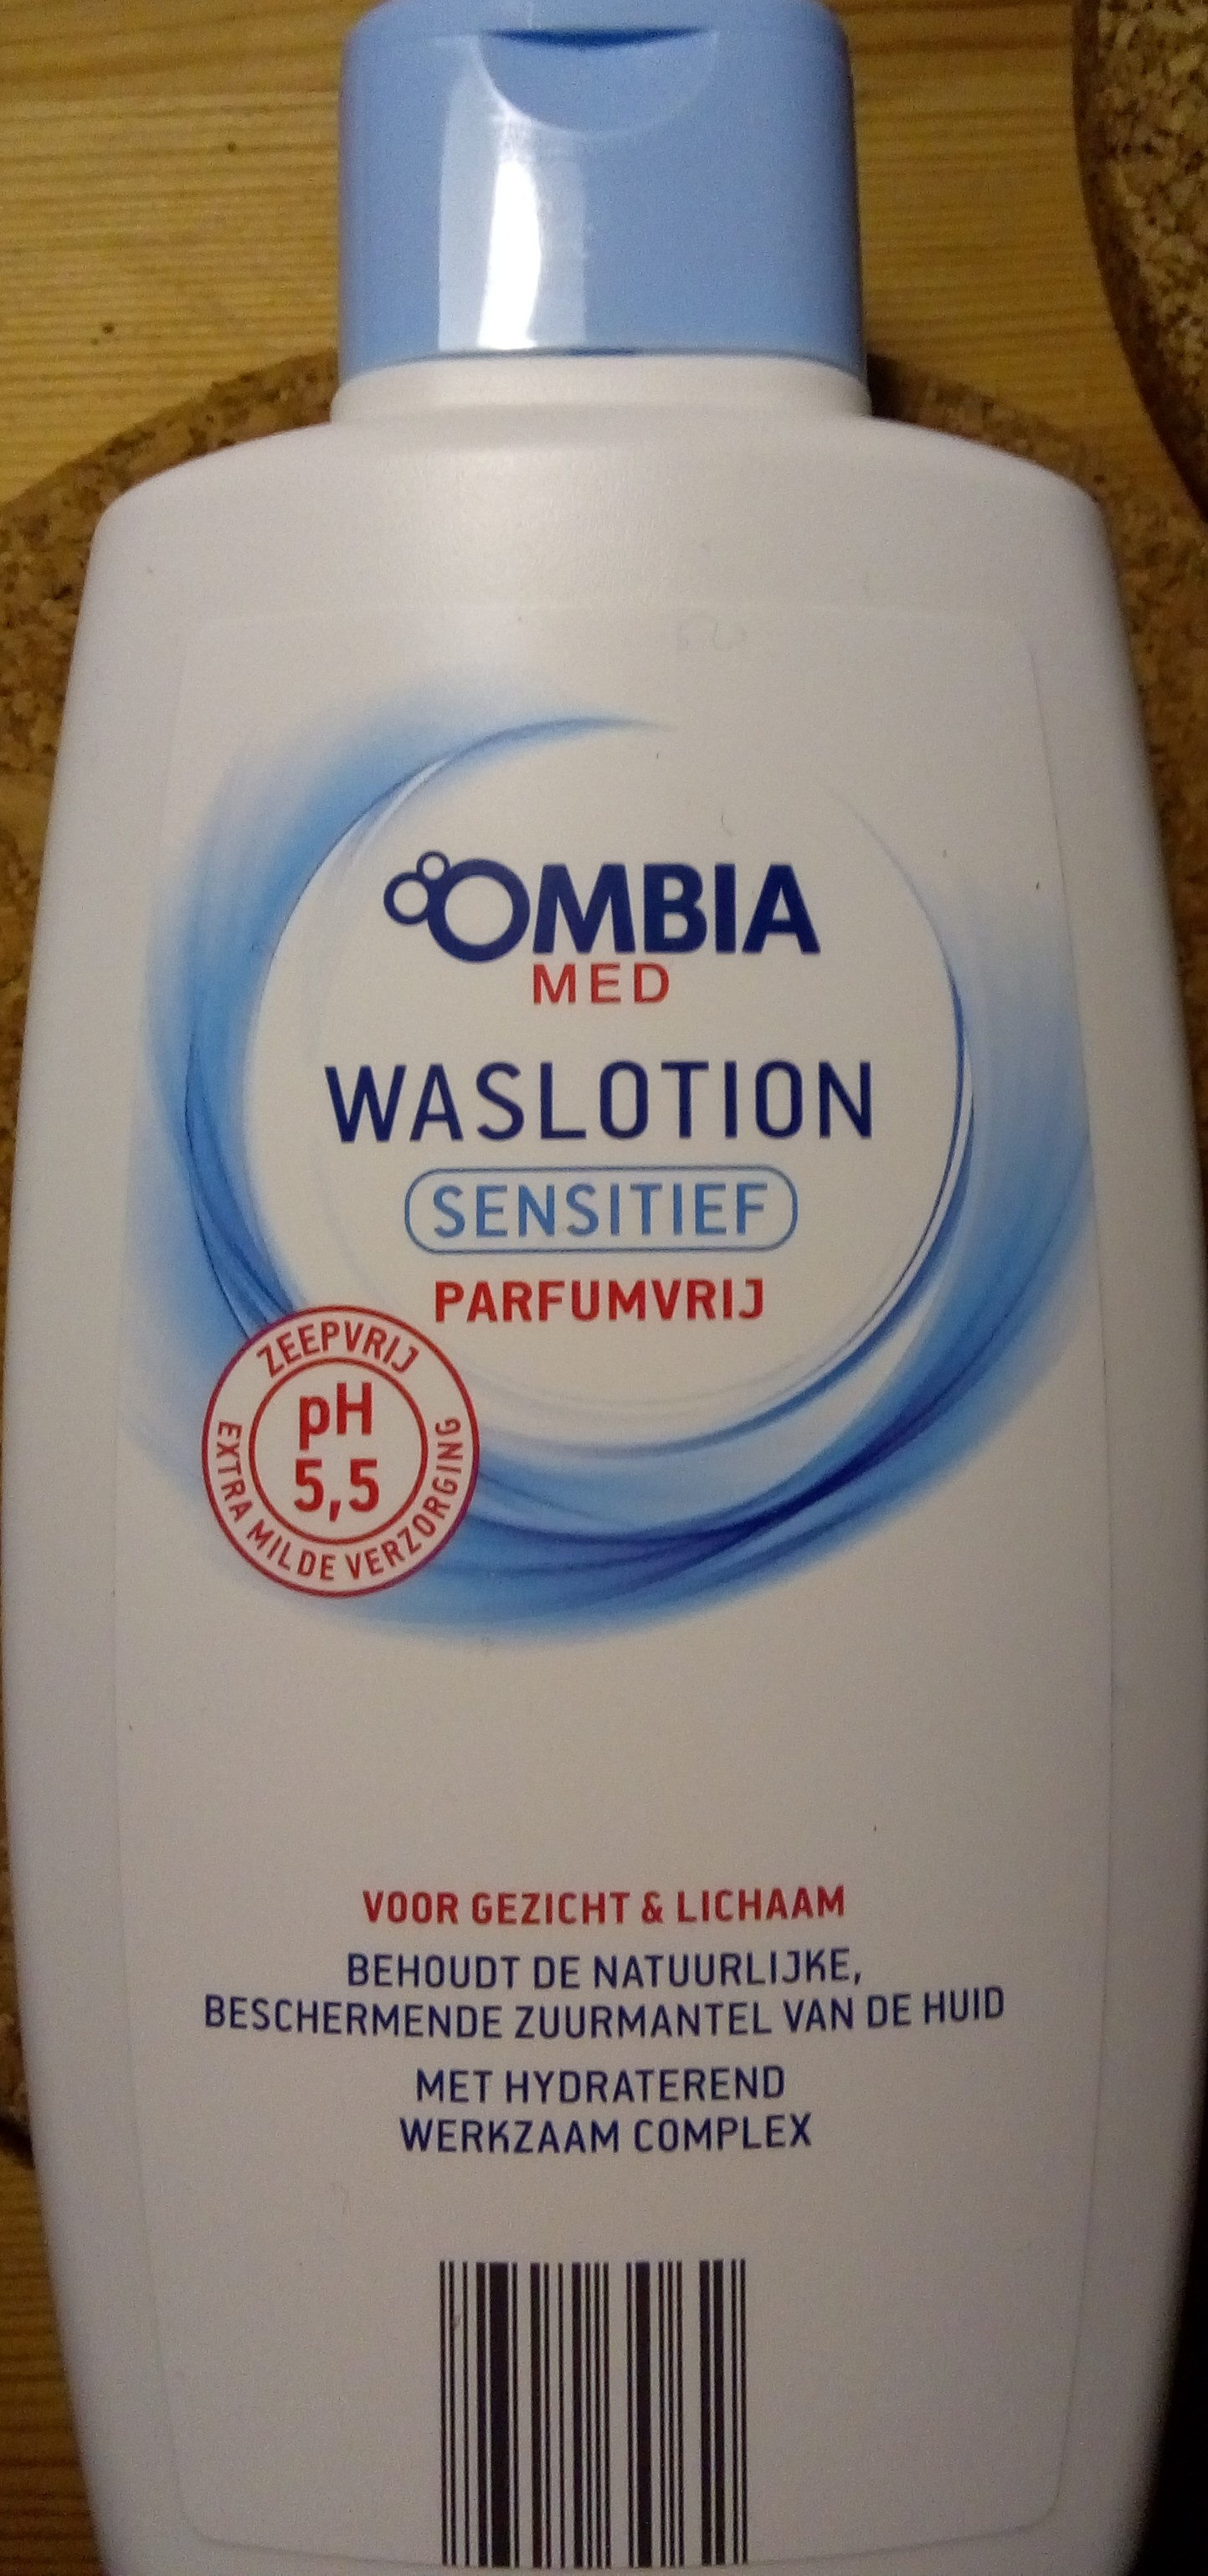 Ombia Med waslotion sensitief - Product - nl